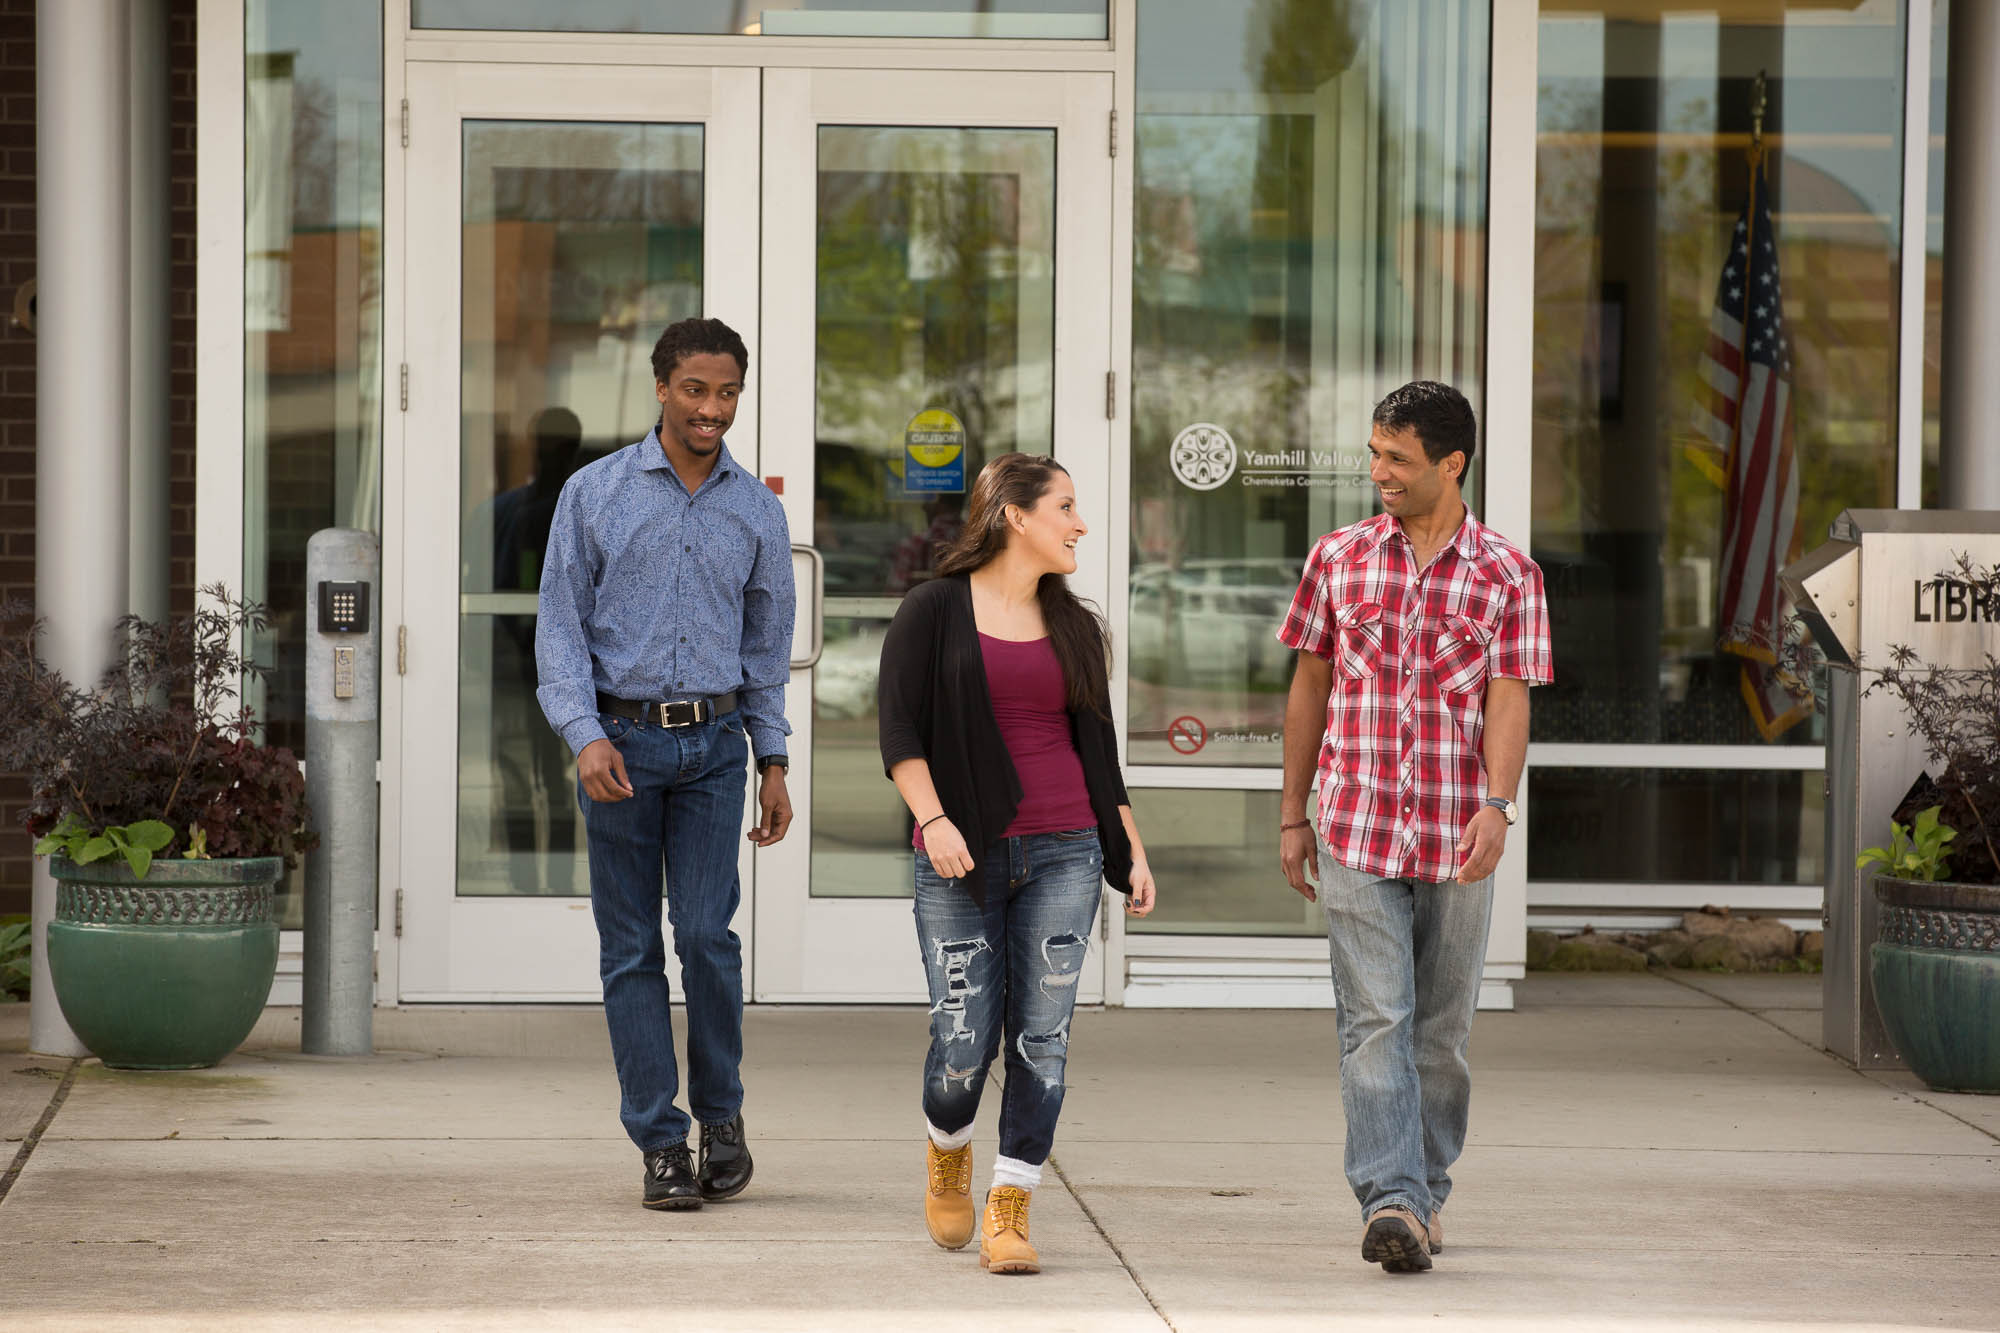 Students walking out from the entrance of the Chemeketa Yamhill Valley Campus.